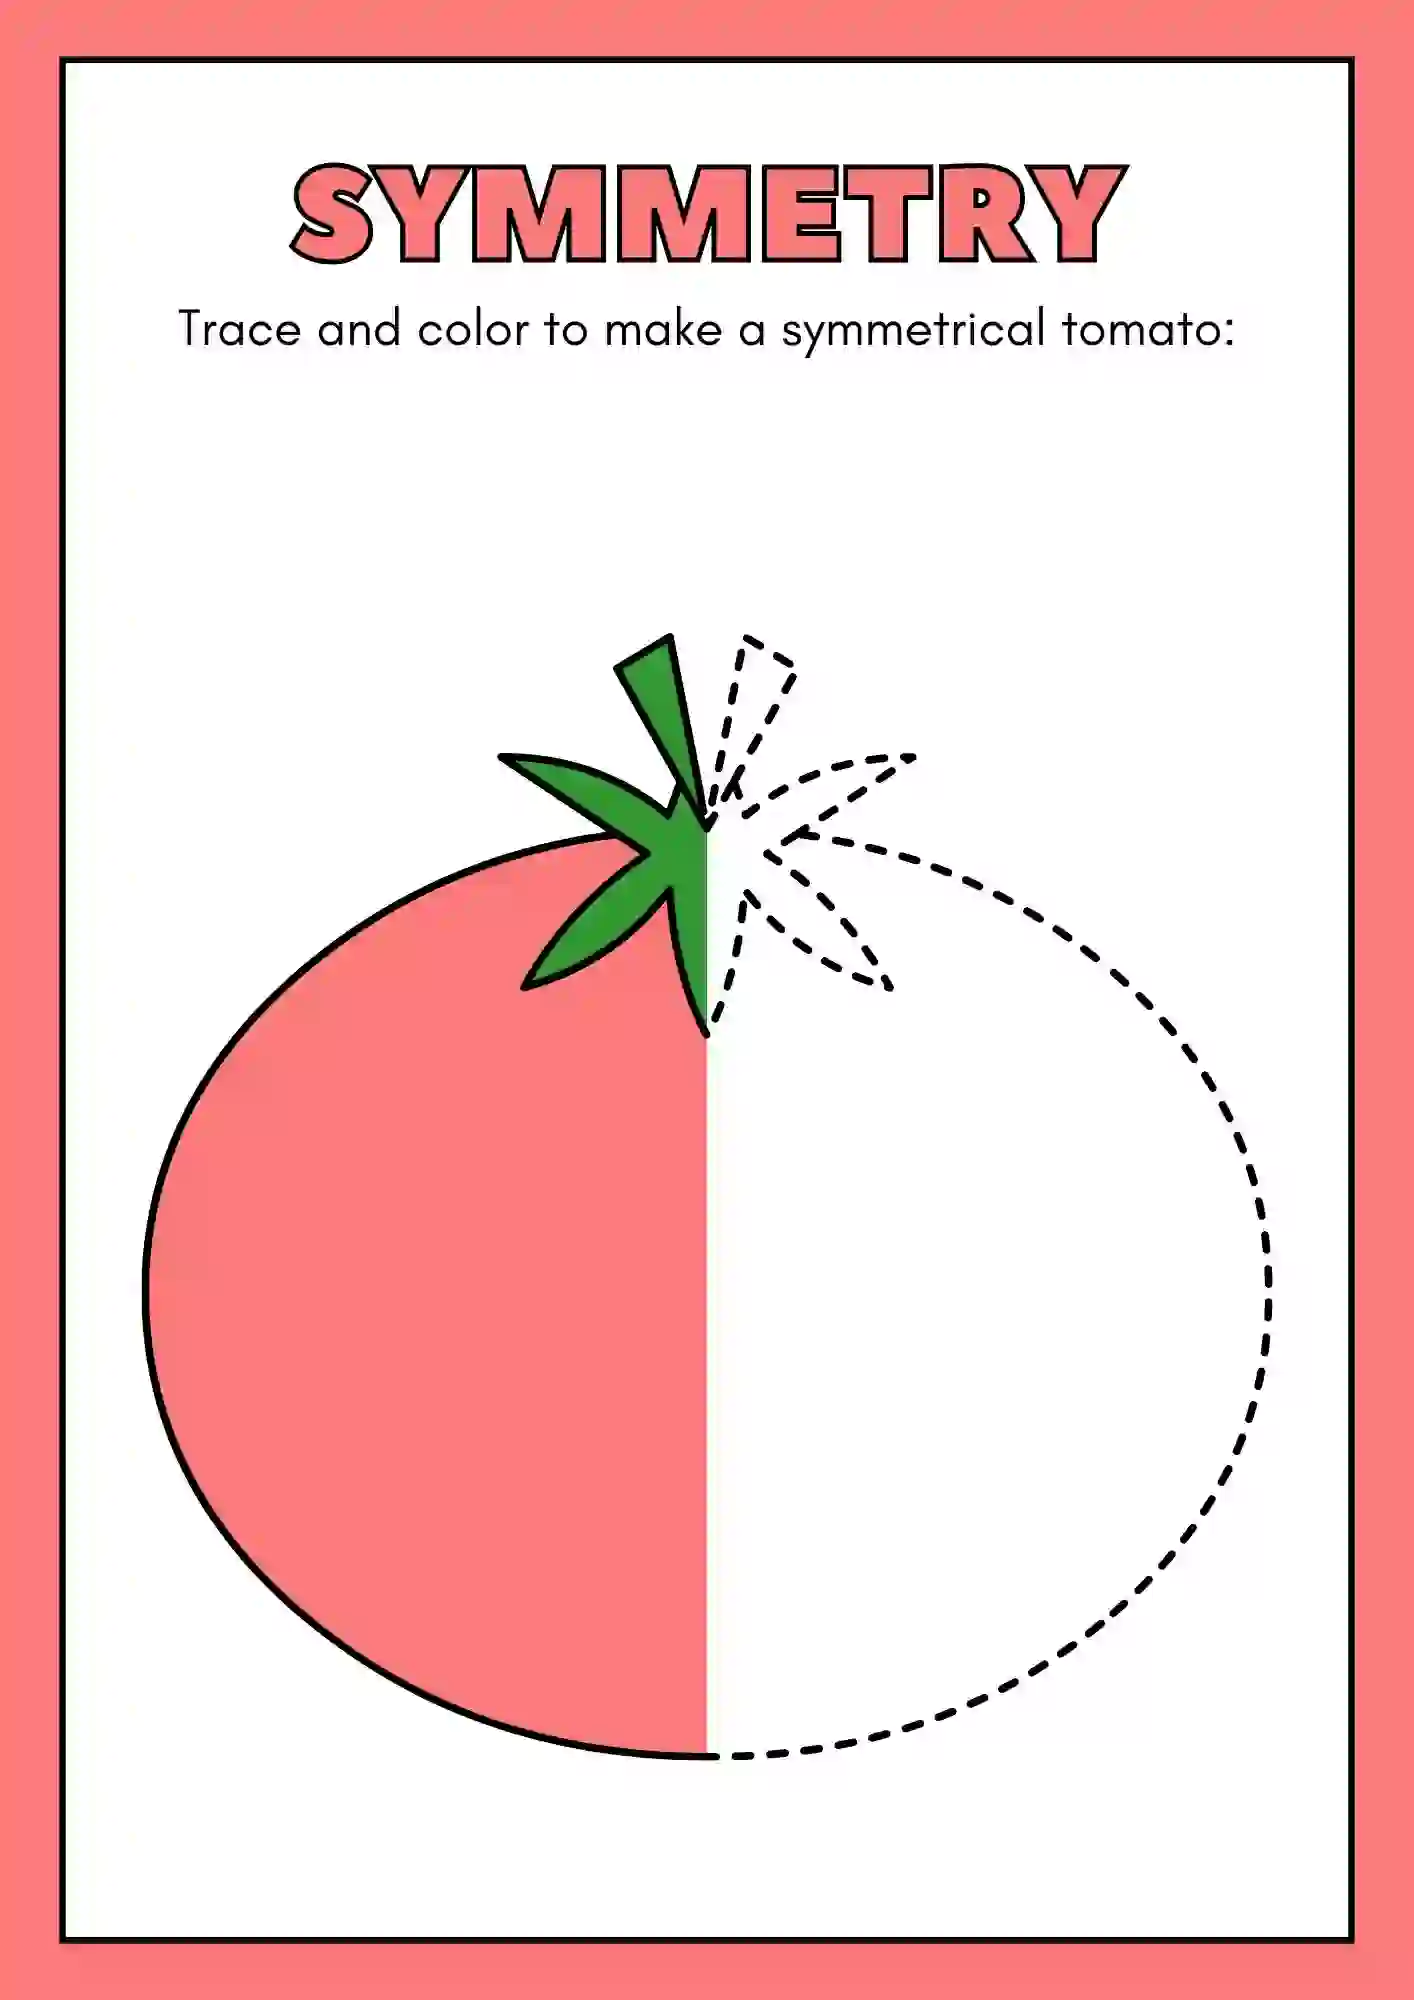 Symmetric Drawing and Coloring worksheets (tomato)